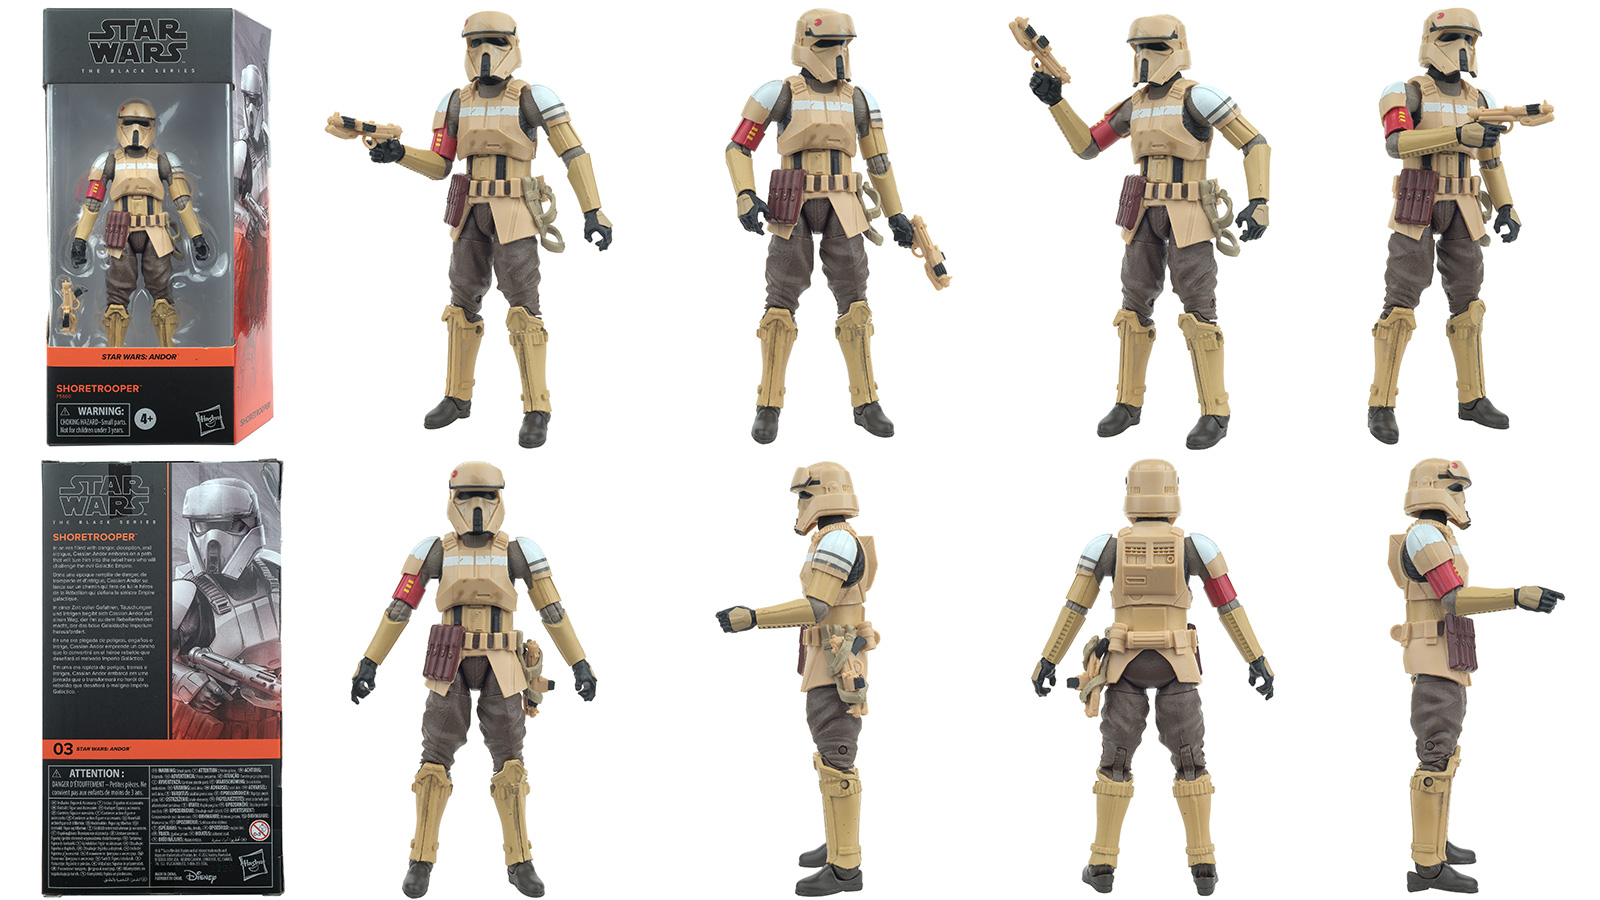 New Photos - Target Exclusive The Black Series 6-Inch Andor 03: Shoretrooper